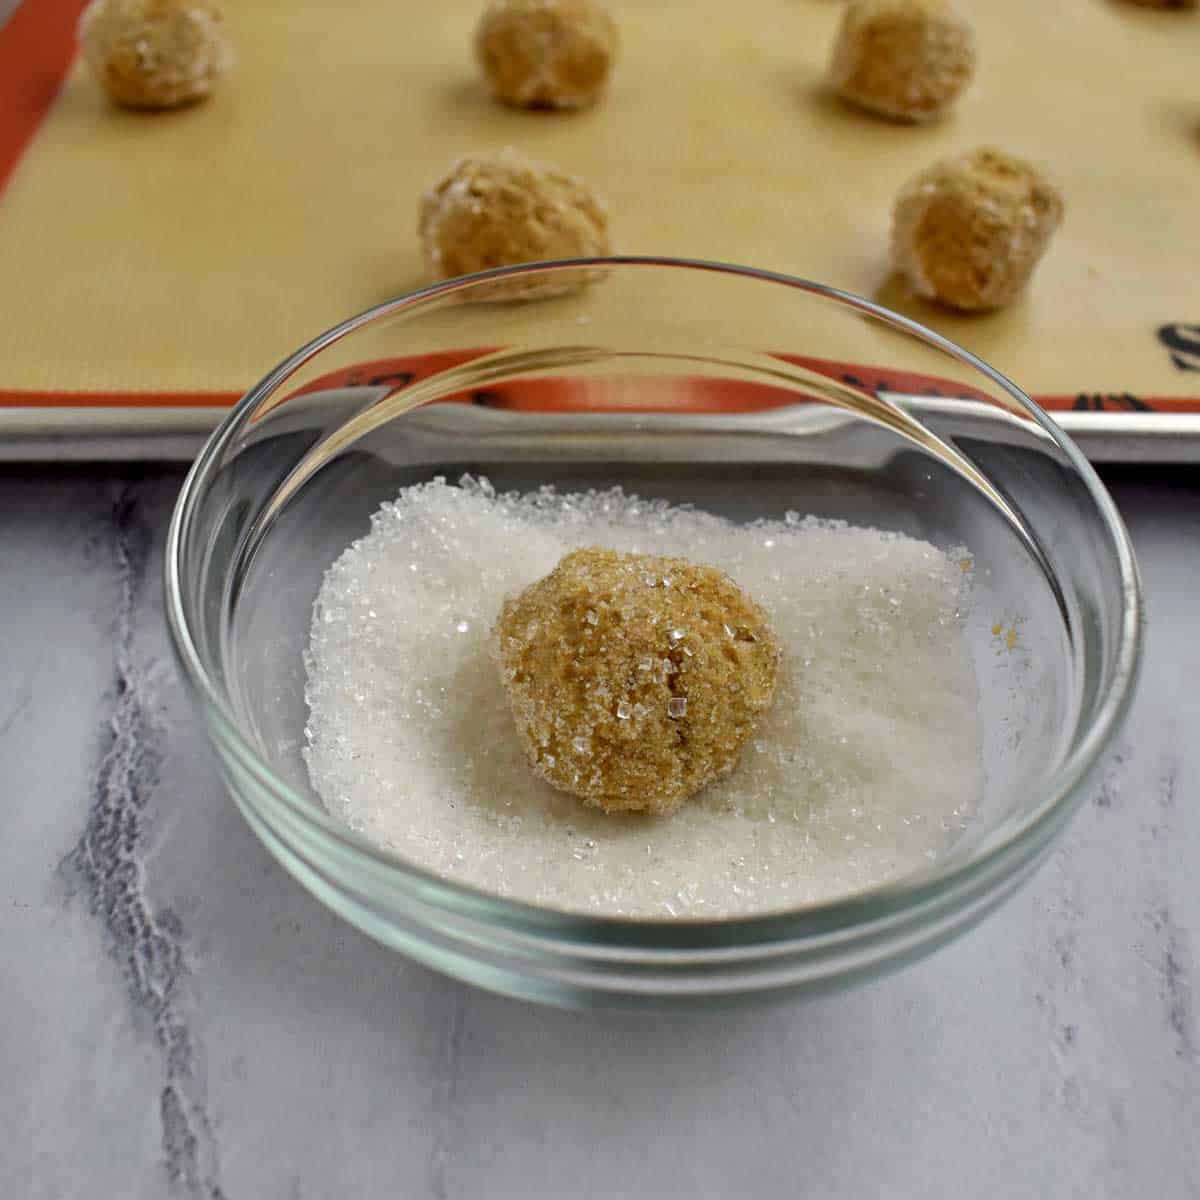 A gluten free ginger snaps dough ball in a small bowl of sugar with more dough balls on a baking pan in the background.